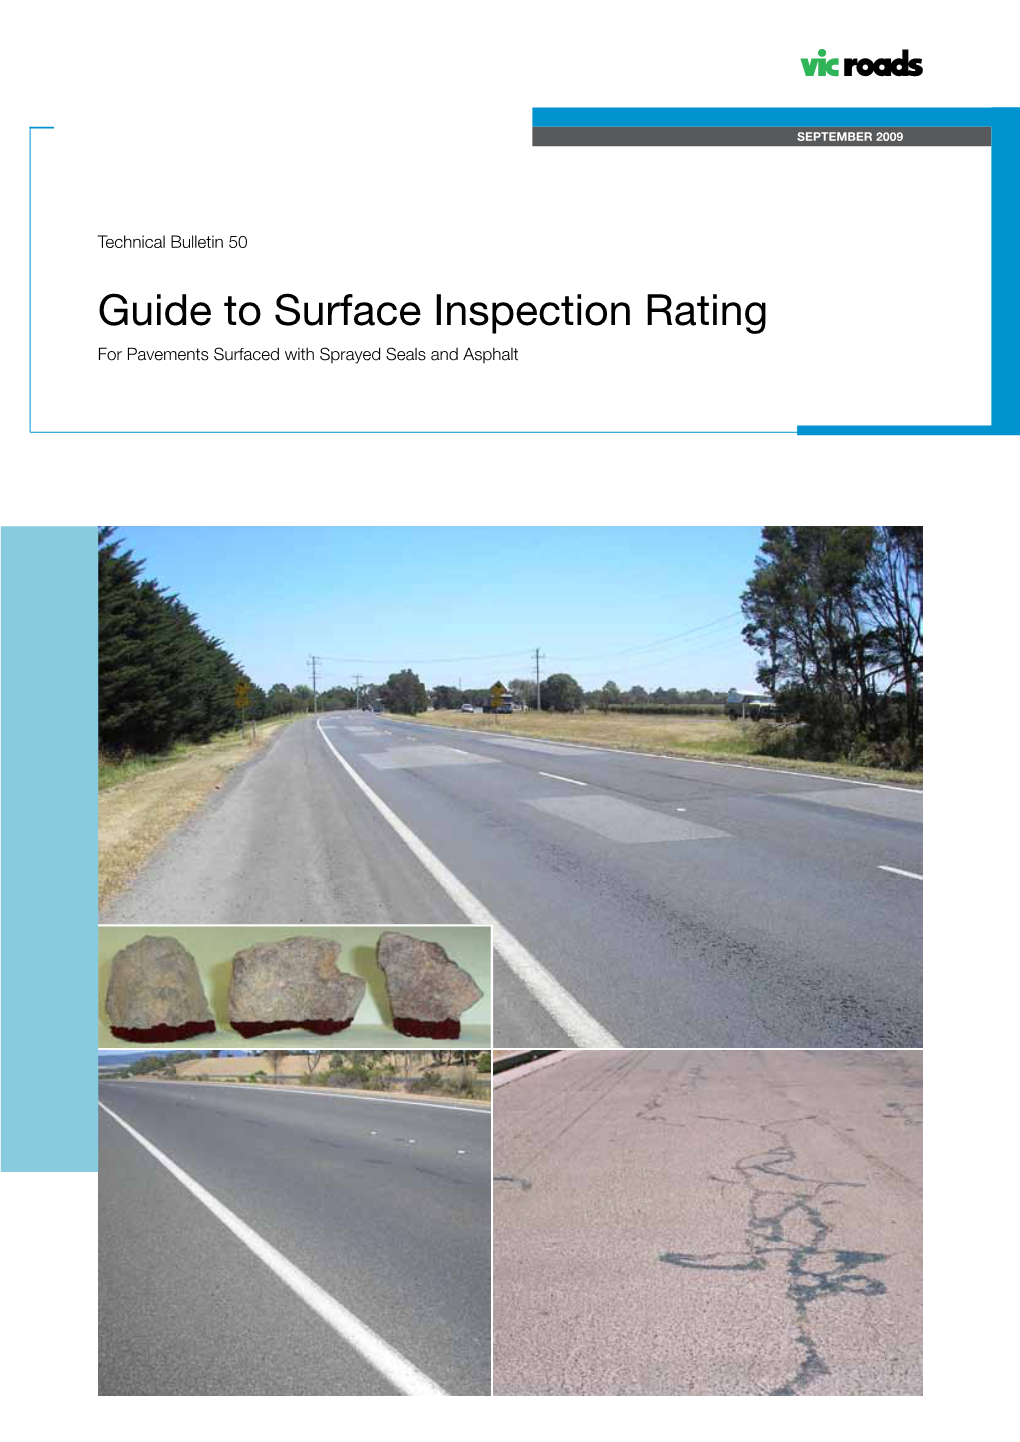 Guide to Surface Inspection Rating